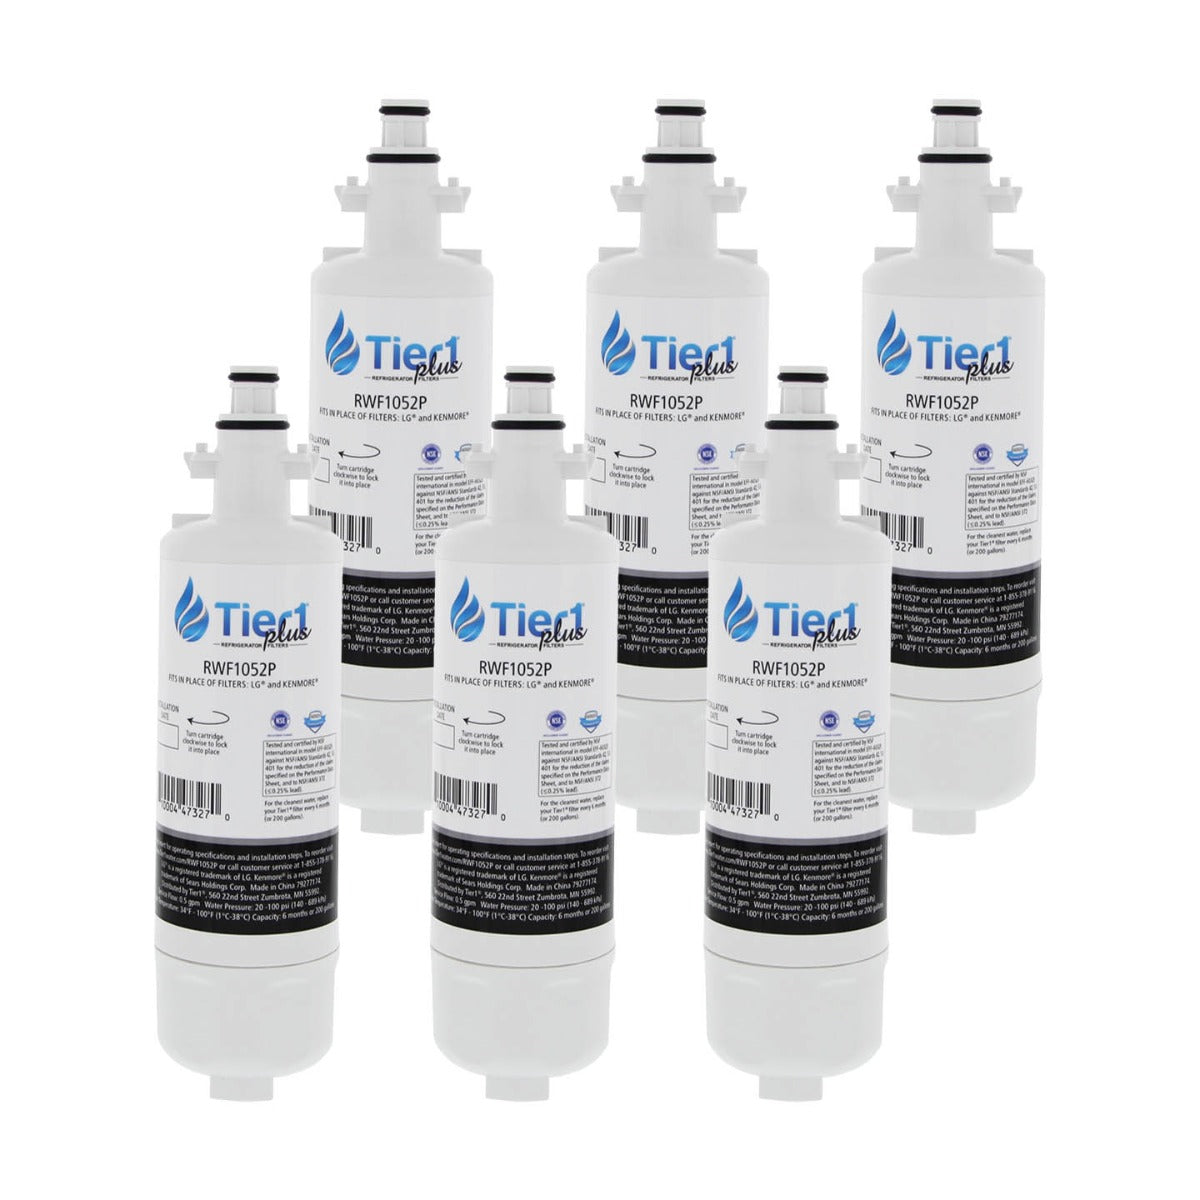 Tier1 Plus LG LT700P Comparable Lead And Mercury Reducing Refrigerator Water Filter